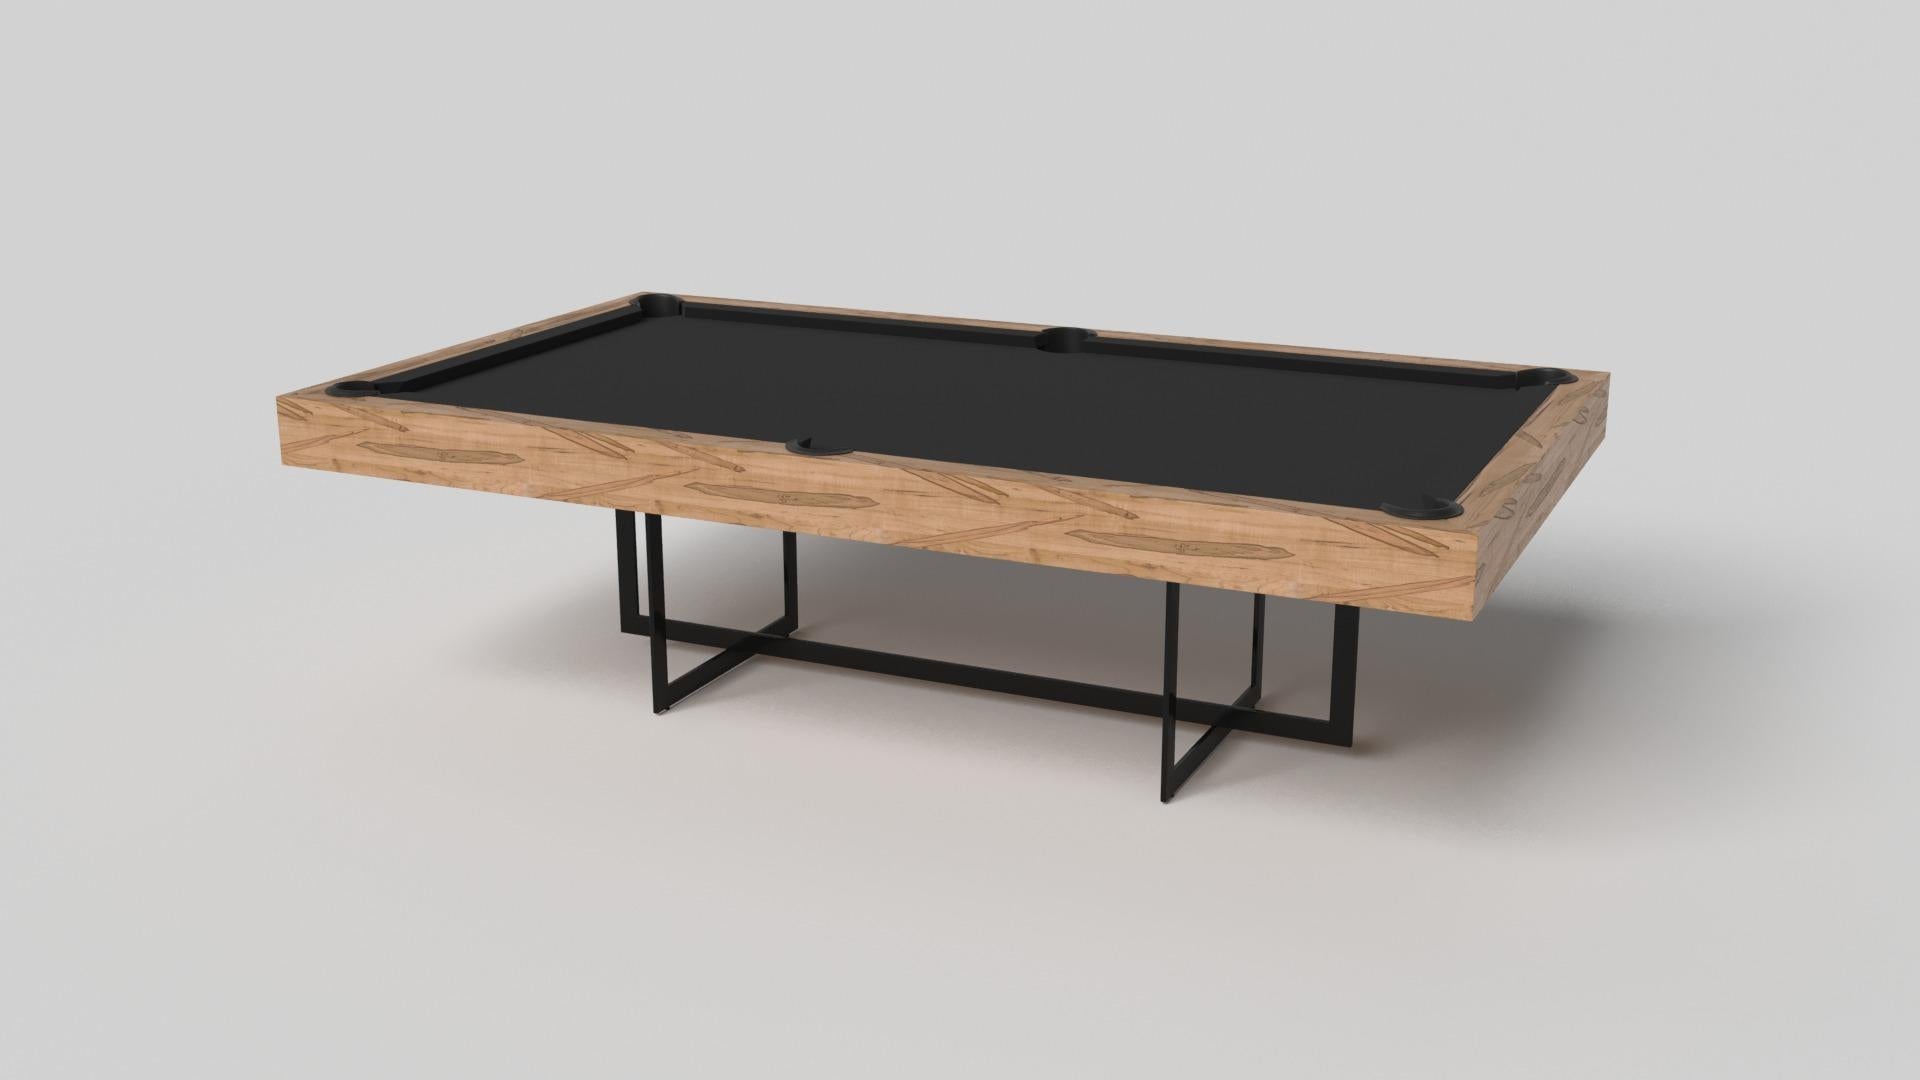 With an open metal foundation, our Beso table is a unique expression of contemporary forms and negative space. This pool table is handcrafted by our master artisans with a rectangle-in-rectangle base that echoes the angles and edges of a regulation